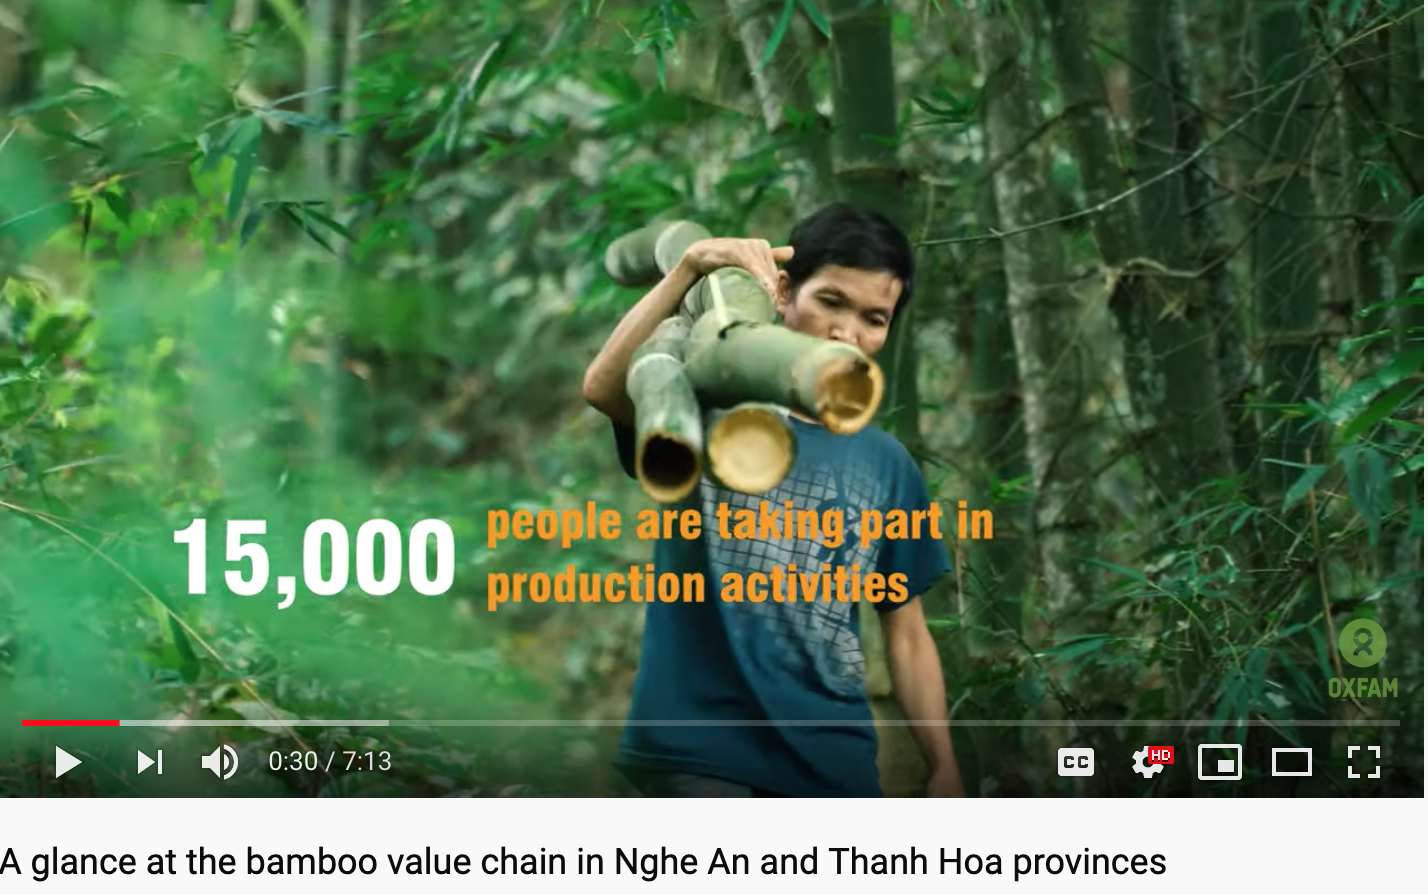 Oxfam video: A glance at the bamboo value chain in Nghe An and Thanh Hoa provinces